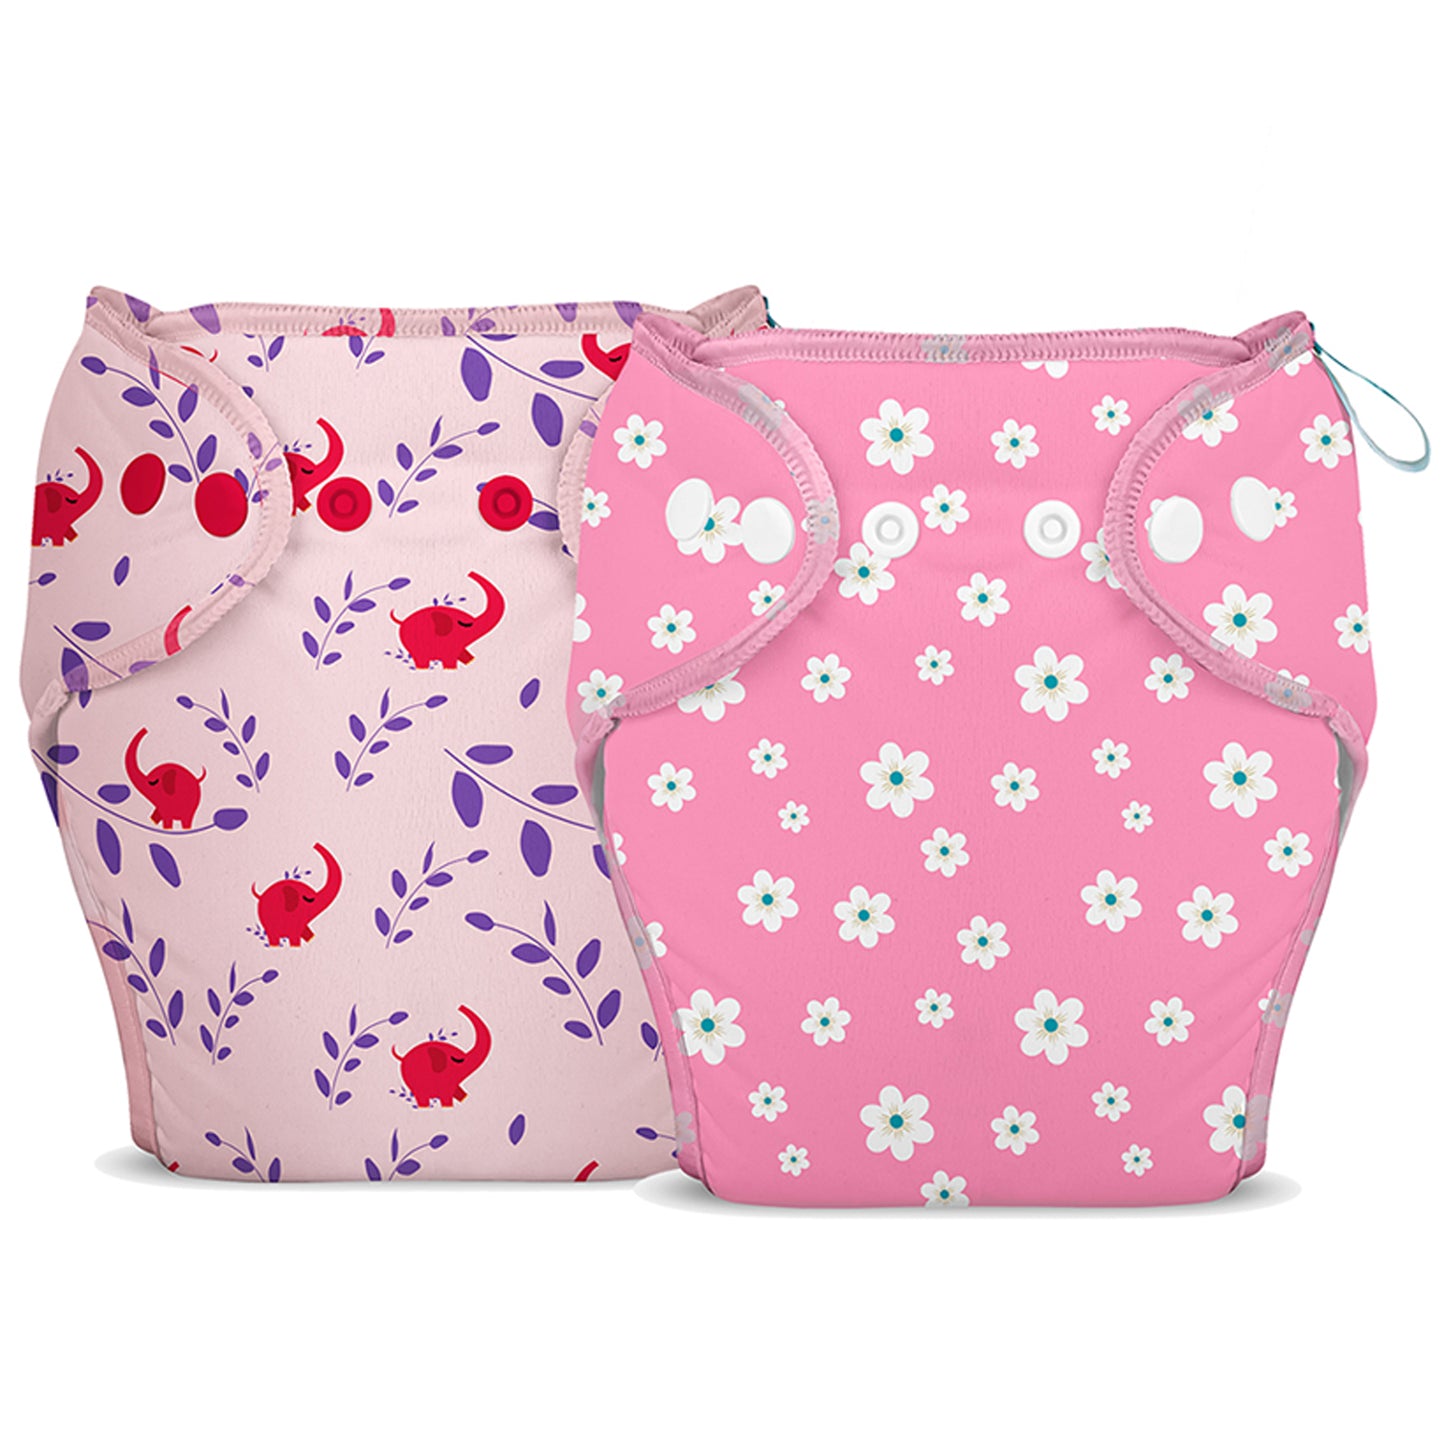 2 Piece Pack of New & Improved Smart Nappy for 10-18 months old (Size LXL)